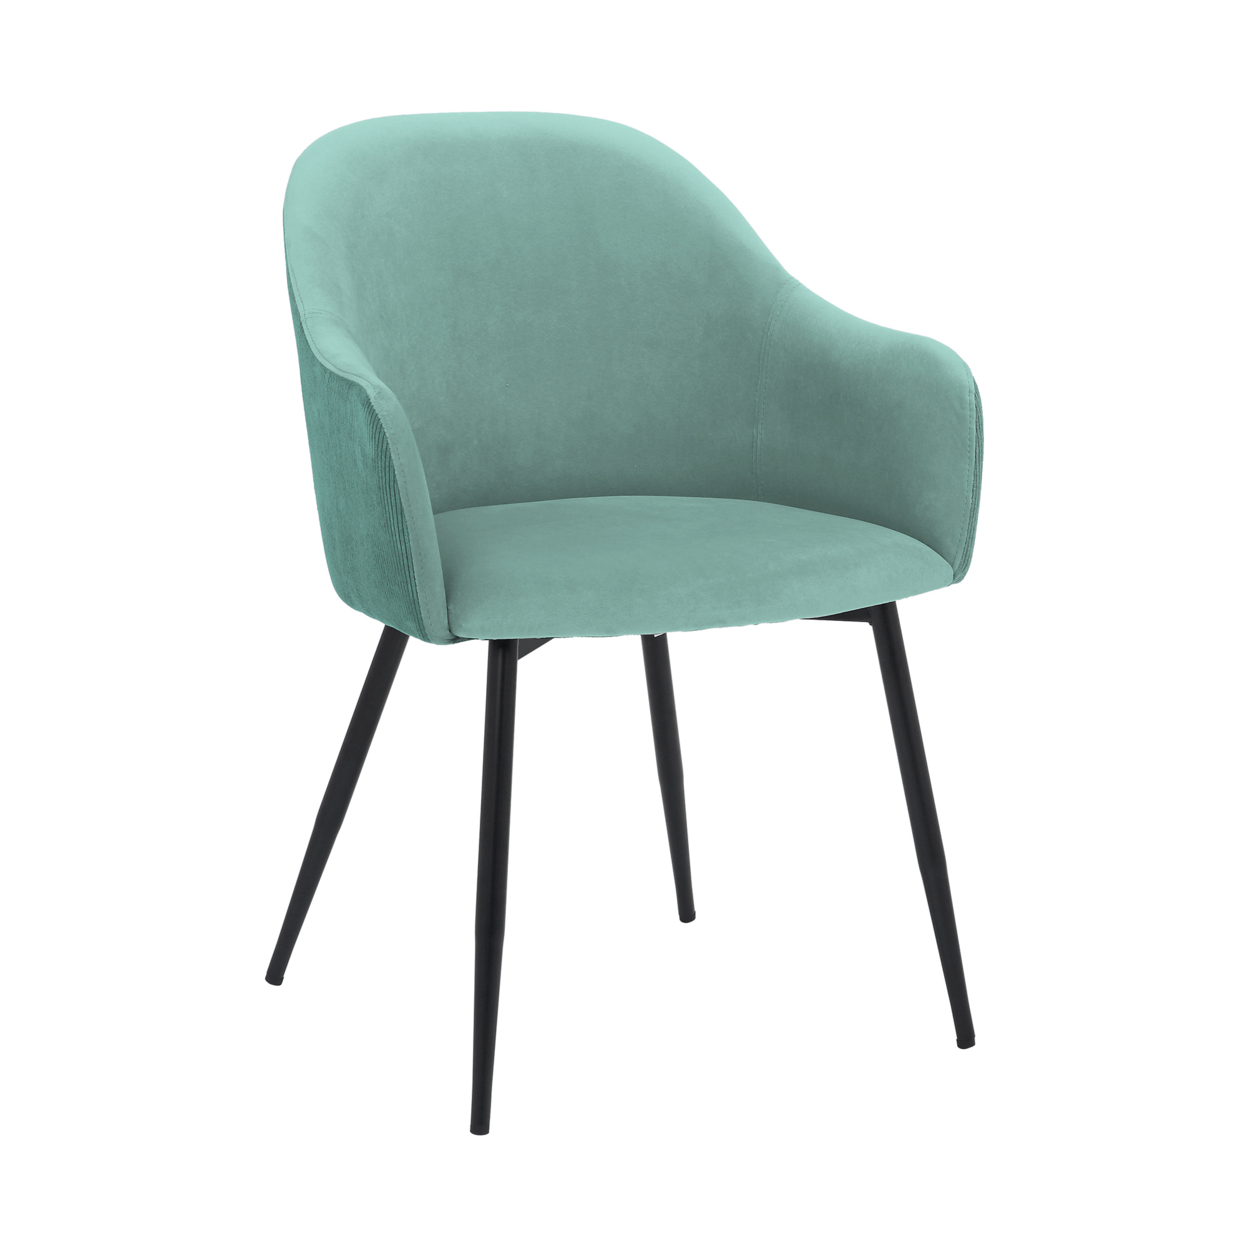 23 Inch Modern Dining Chair, Curved Back, Polyester, Metal Legs, Teal Blue- Saltoro Sherpi